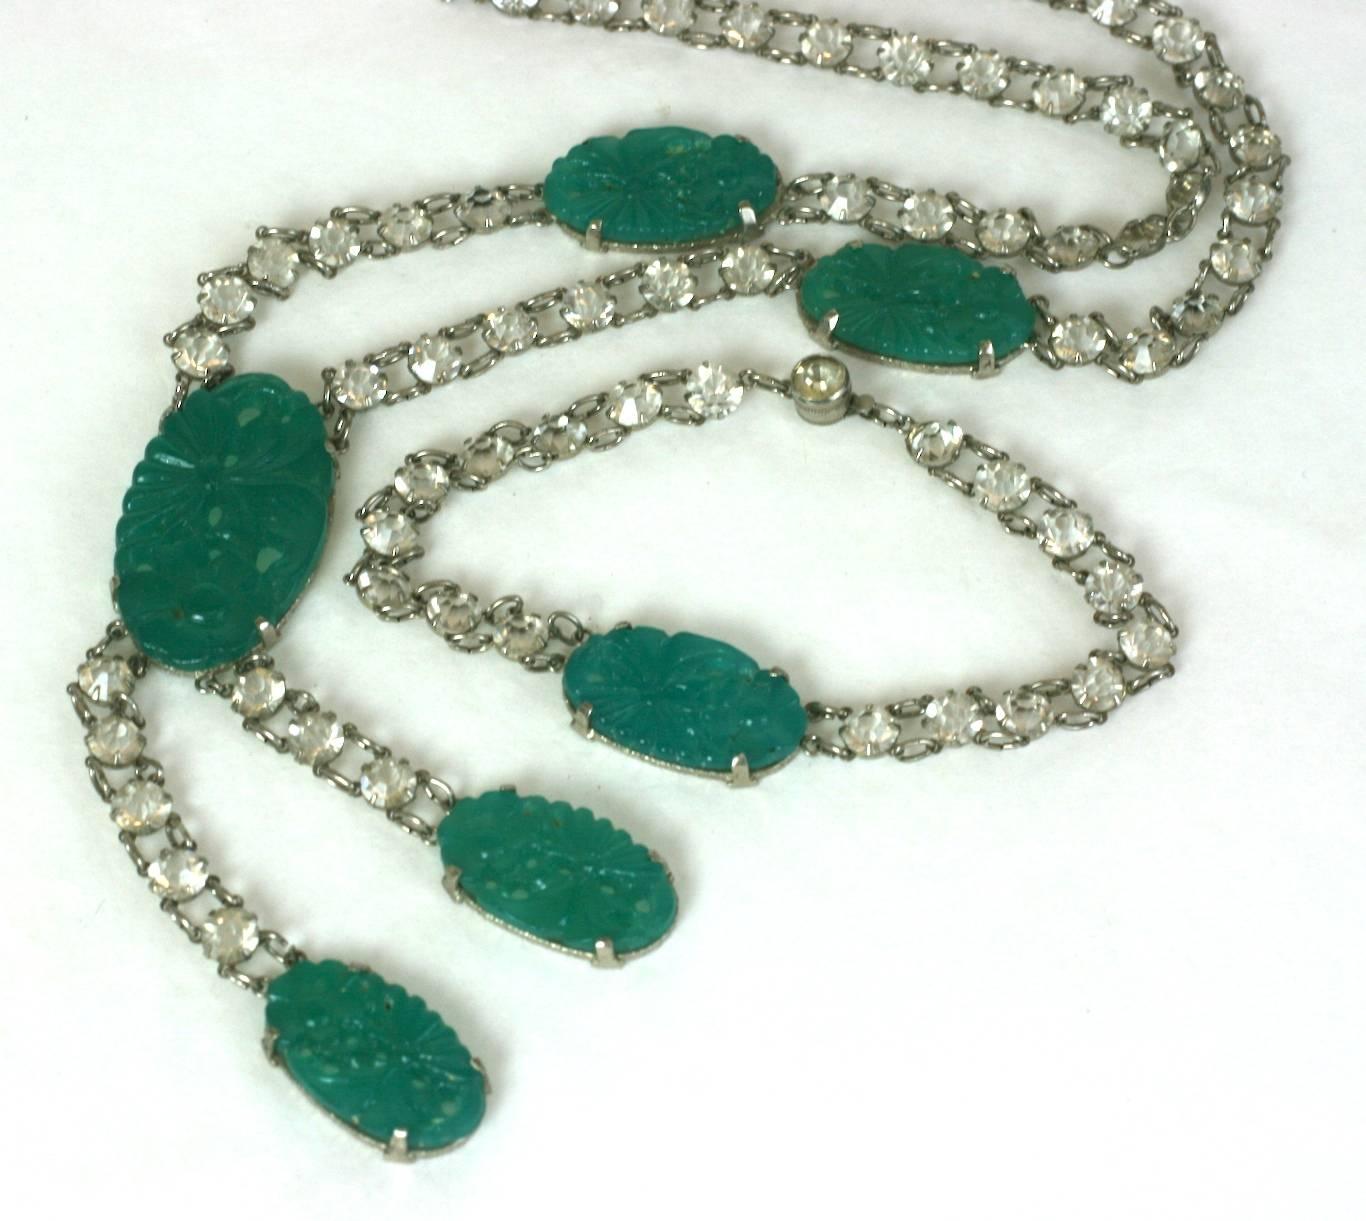 Delicate Art Deco Faux Jade Paste Suite from the 1920's. Stations of faux jade molded pate de verre are attached to prong set crystals. Pendant has double asymetrical drop. Bracelet has one central faux jade station. 
Delicate yet extremely